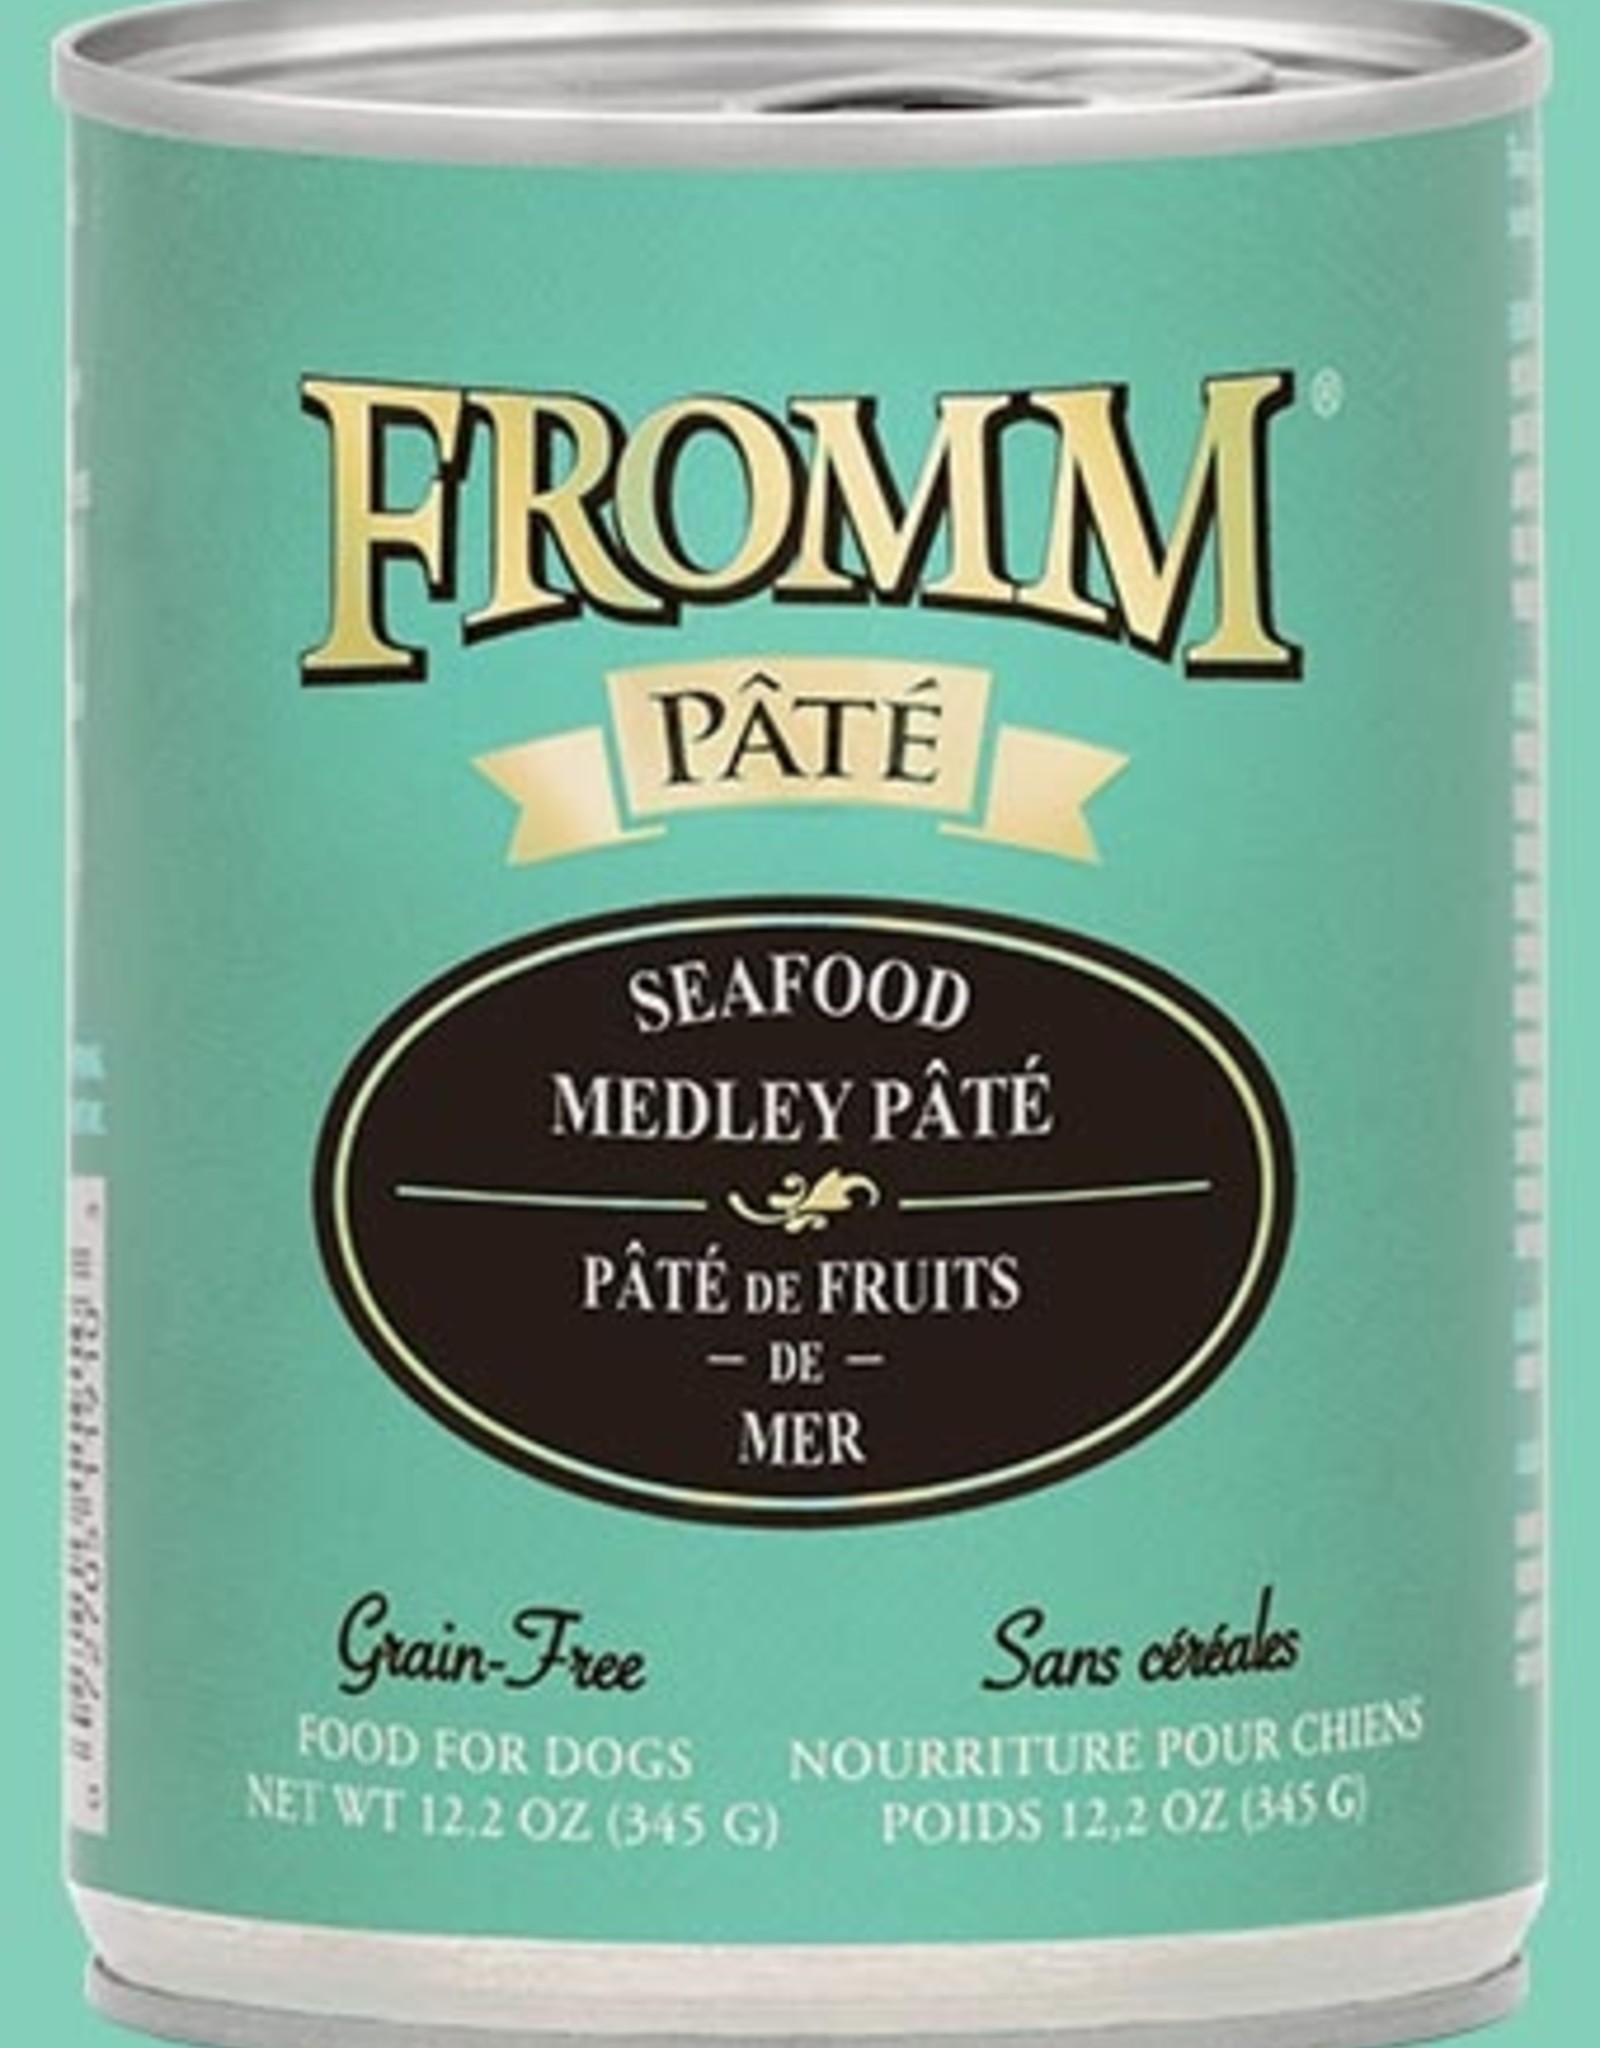 FROMM FAMILY FOODS LLC FROMM DOG PATE SEAFOOD MEDLEY CAN 12.2 OZ CASE OF 12